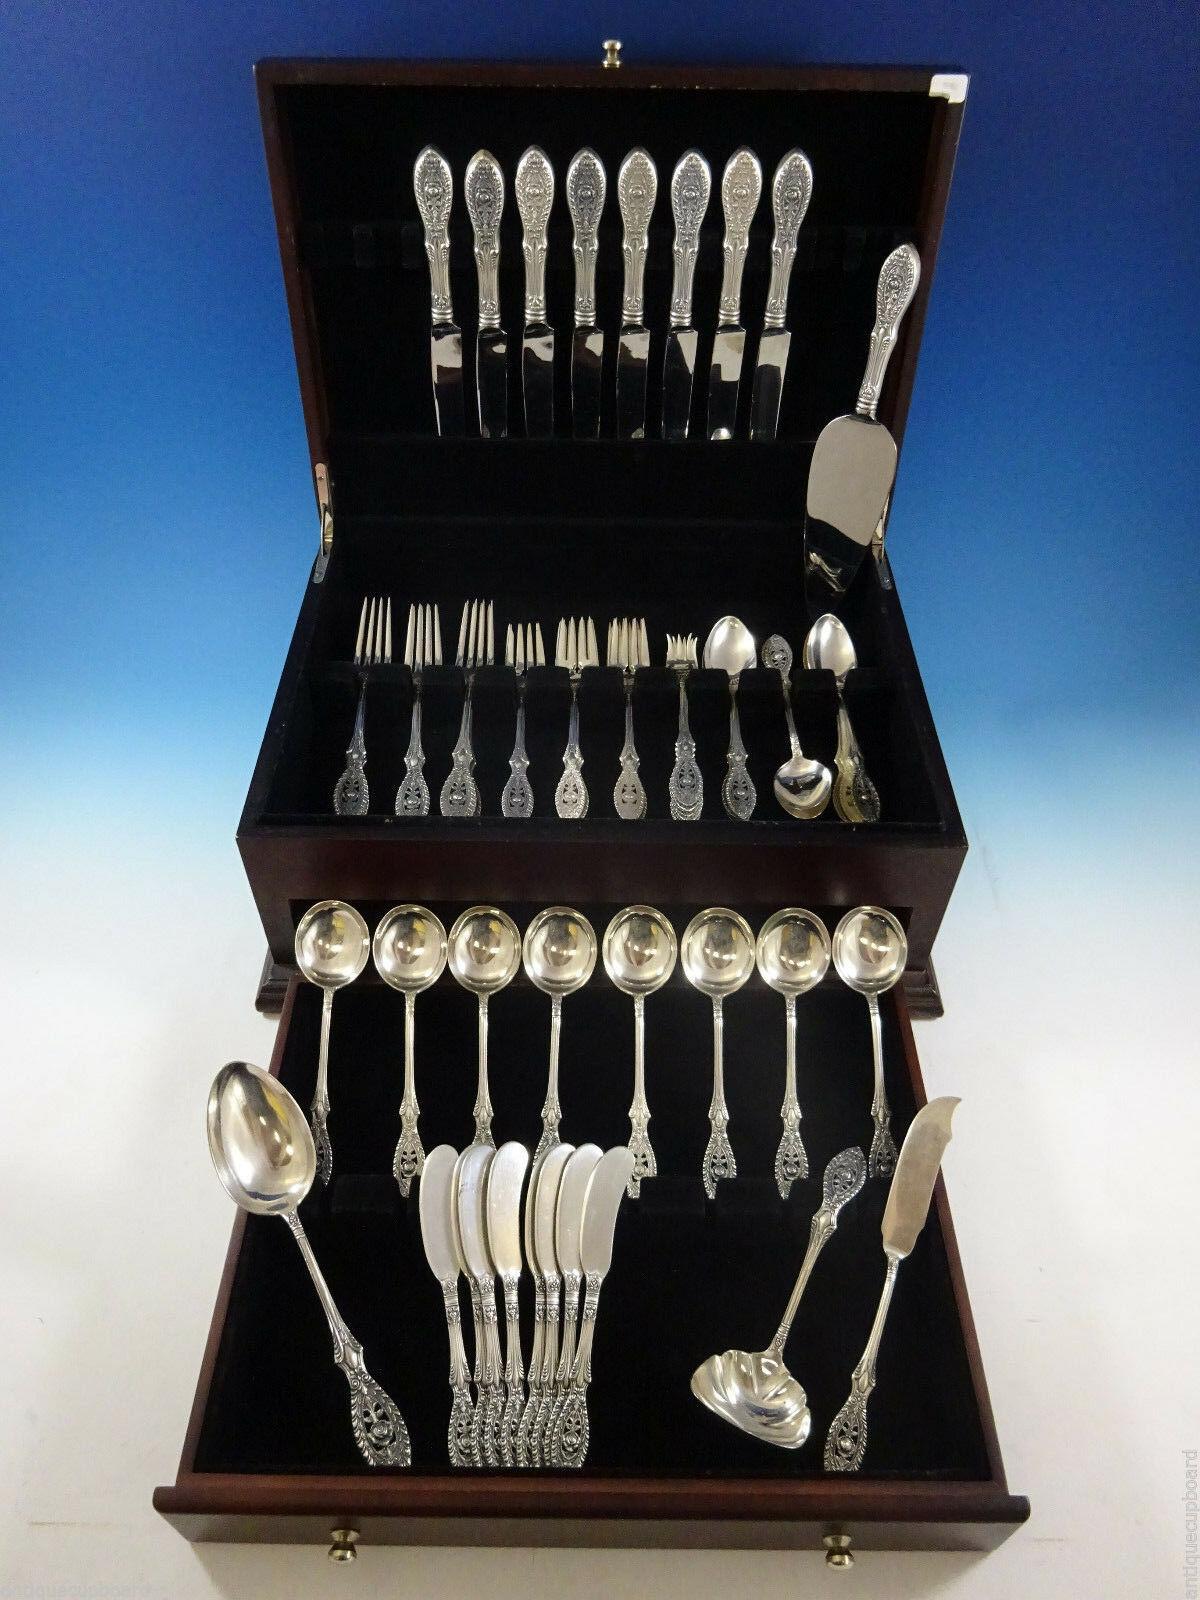 Beautiful floral Valenciennes by Manchester Sterling Silver flatware set - 60 pieces.
This set includes:

8 knives, 9